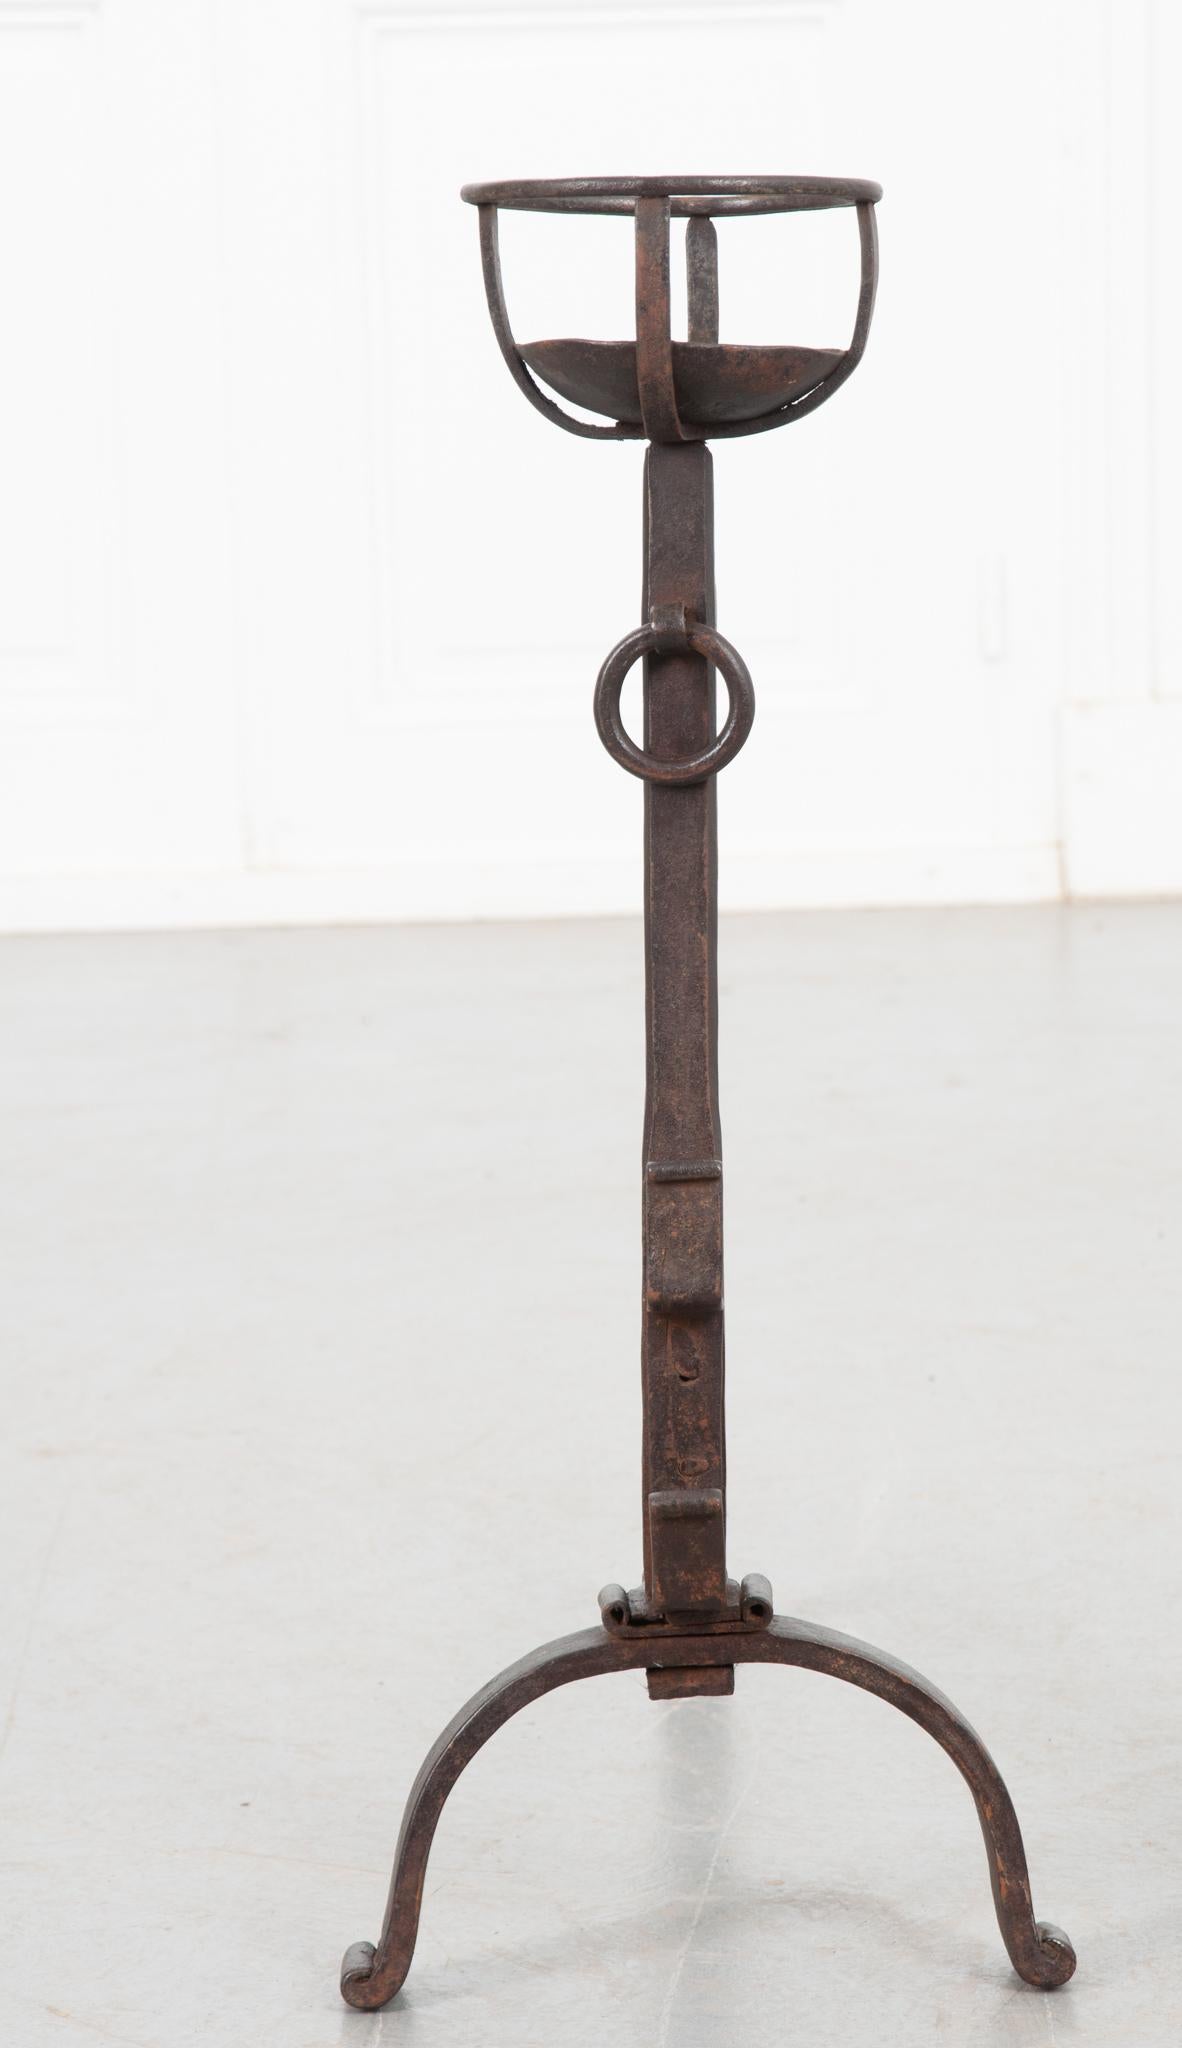 French 19th Century Forged Iron Andirons In Good Condition For Sale In Baton Rouge, LA